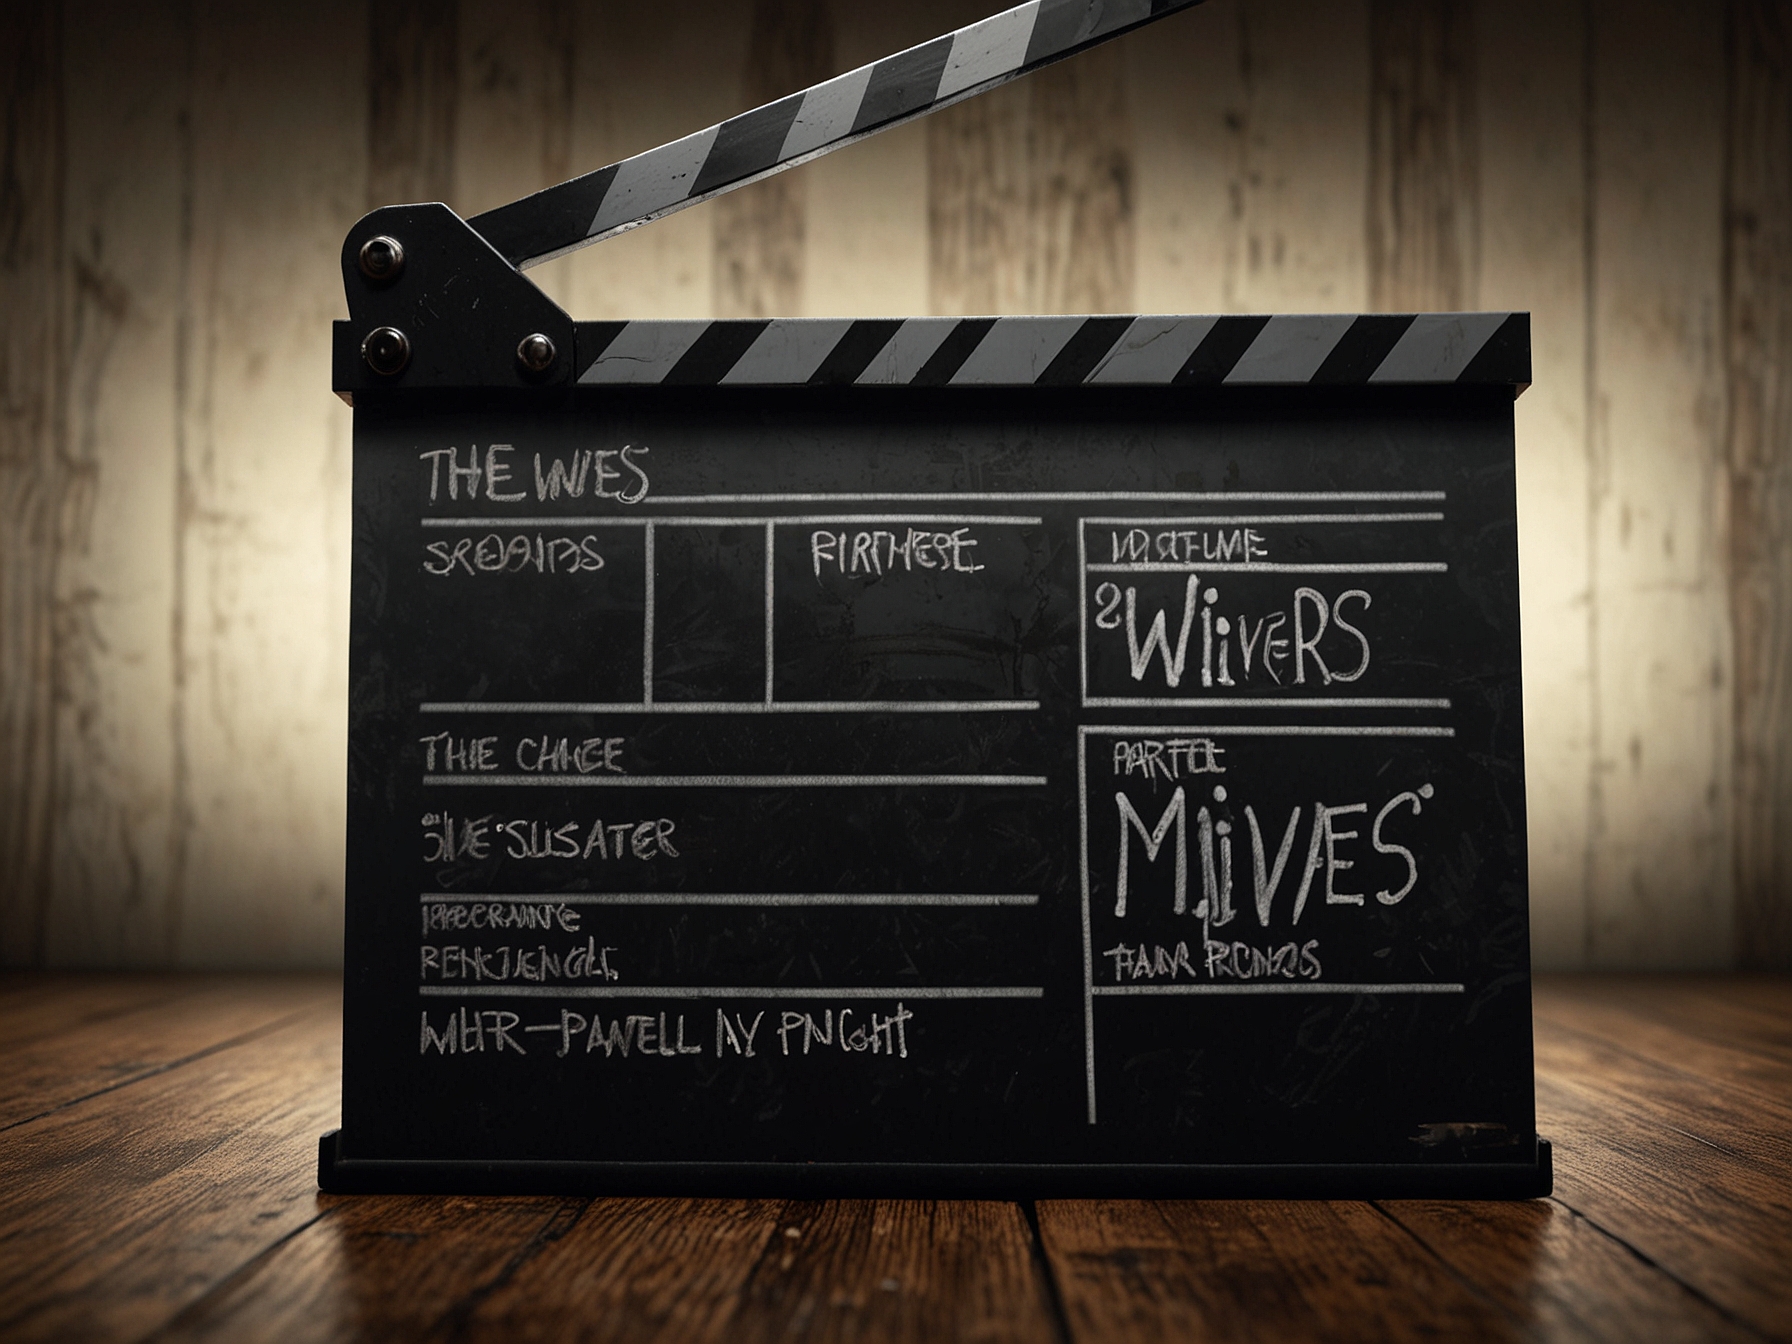 A movie clapperboard with 'The Wives' written on it, set against the backdrop of a stylish film set, highlighting the high stakes and suspenseful nature of the murder mystery genre.